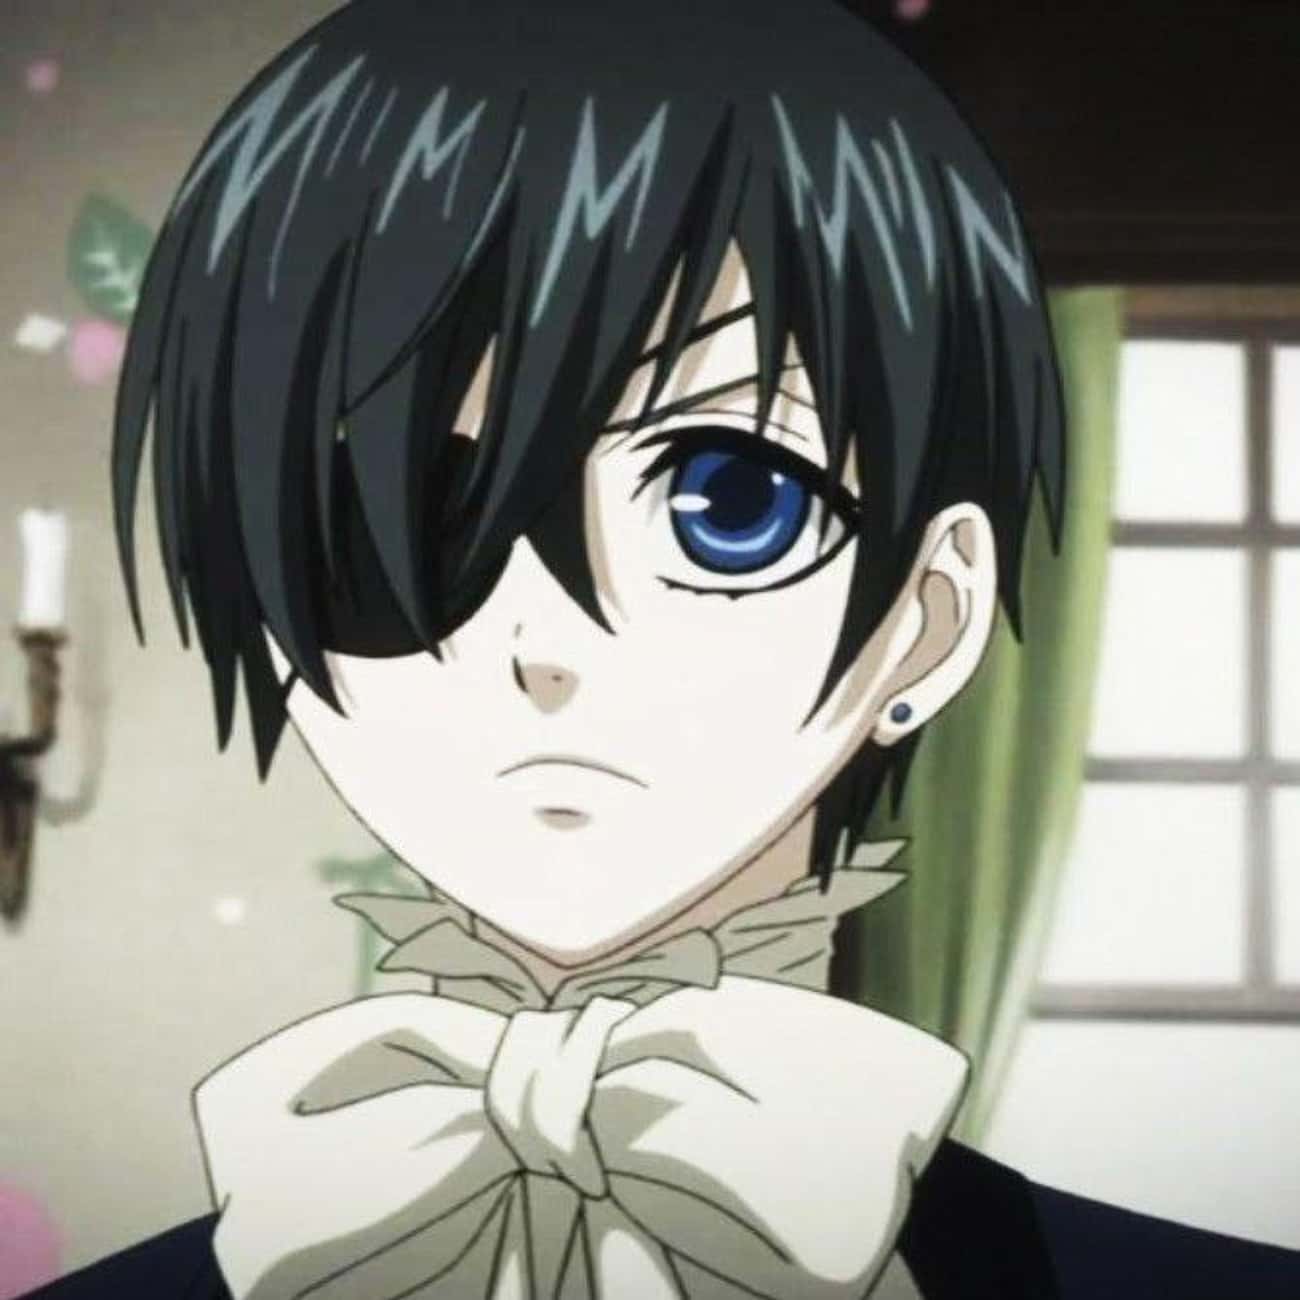 The 30 Best Ciel Phantomhive Quotes (With Images)